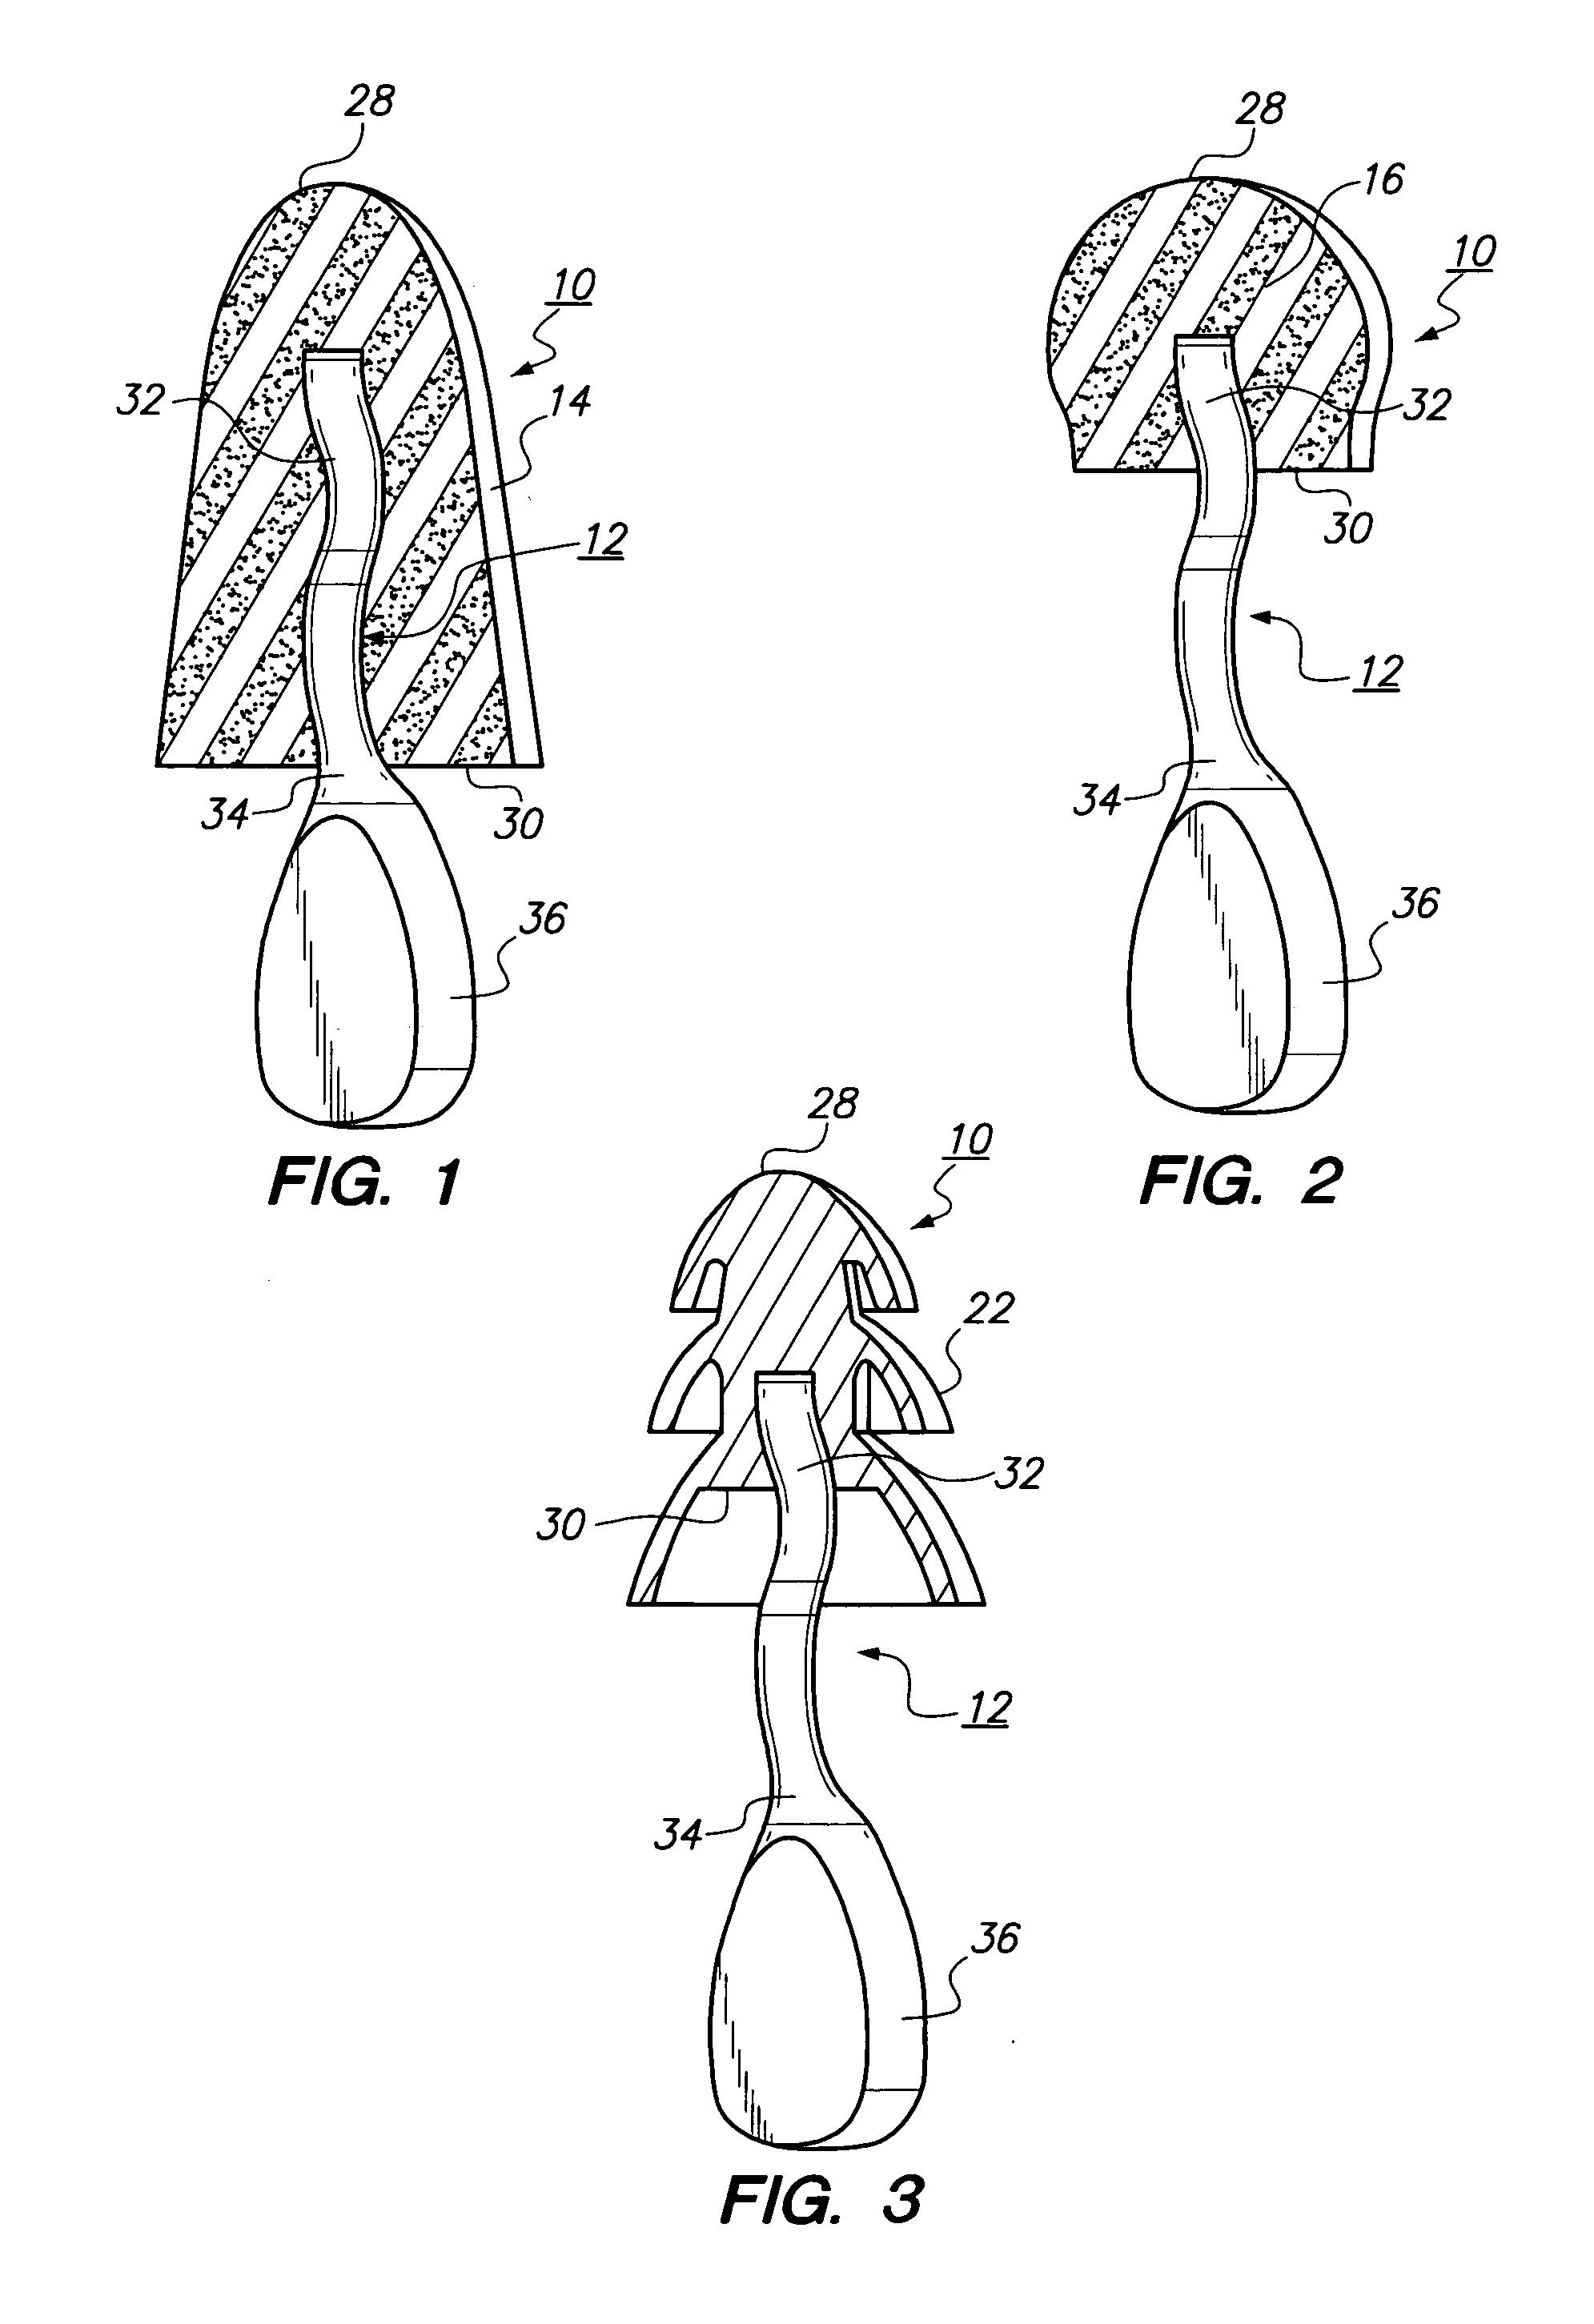 Push-in type of earplug with improved insertion stem